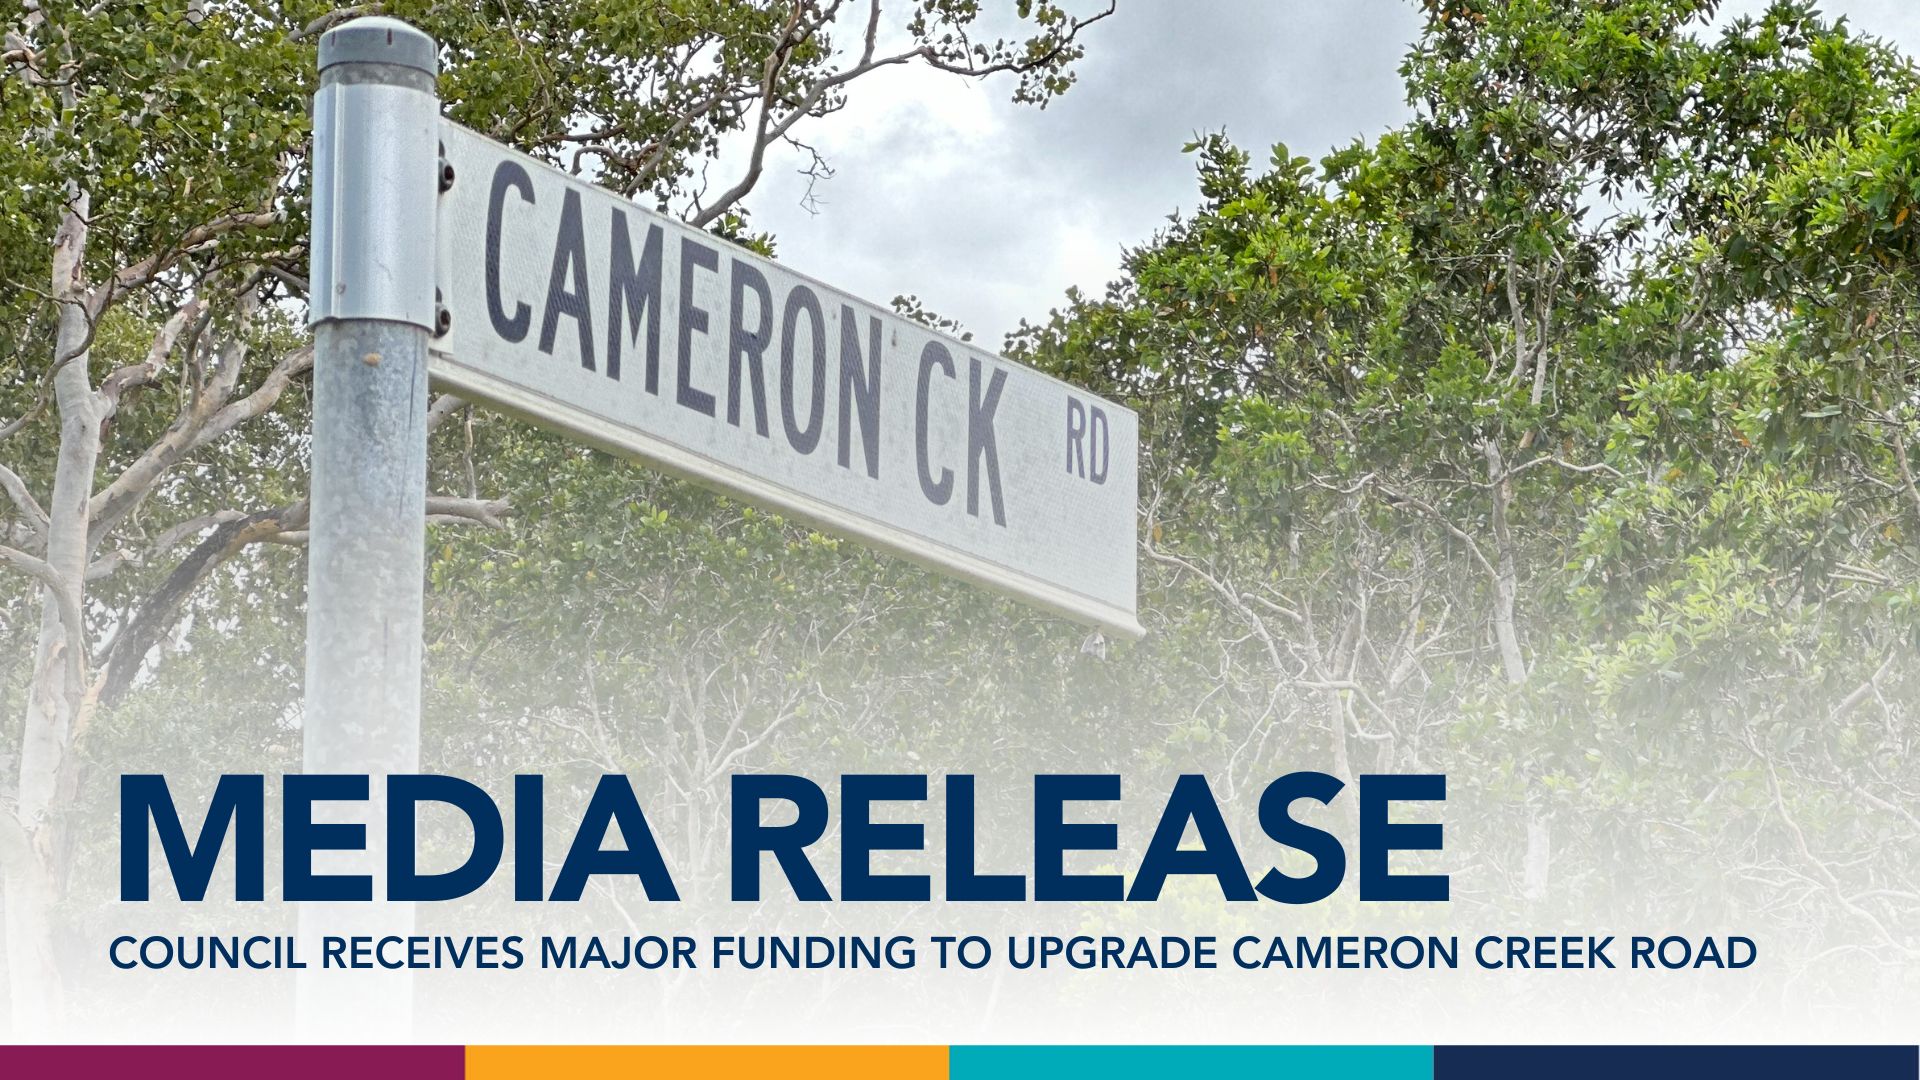 Sealed at last! Council receives maor funding to upgrade Cameron Creek Road